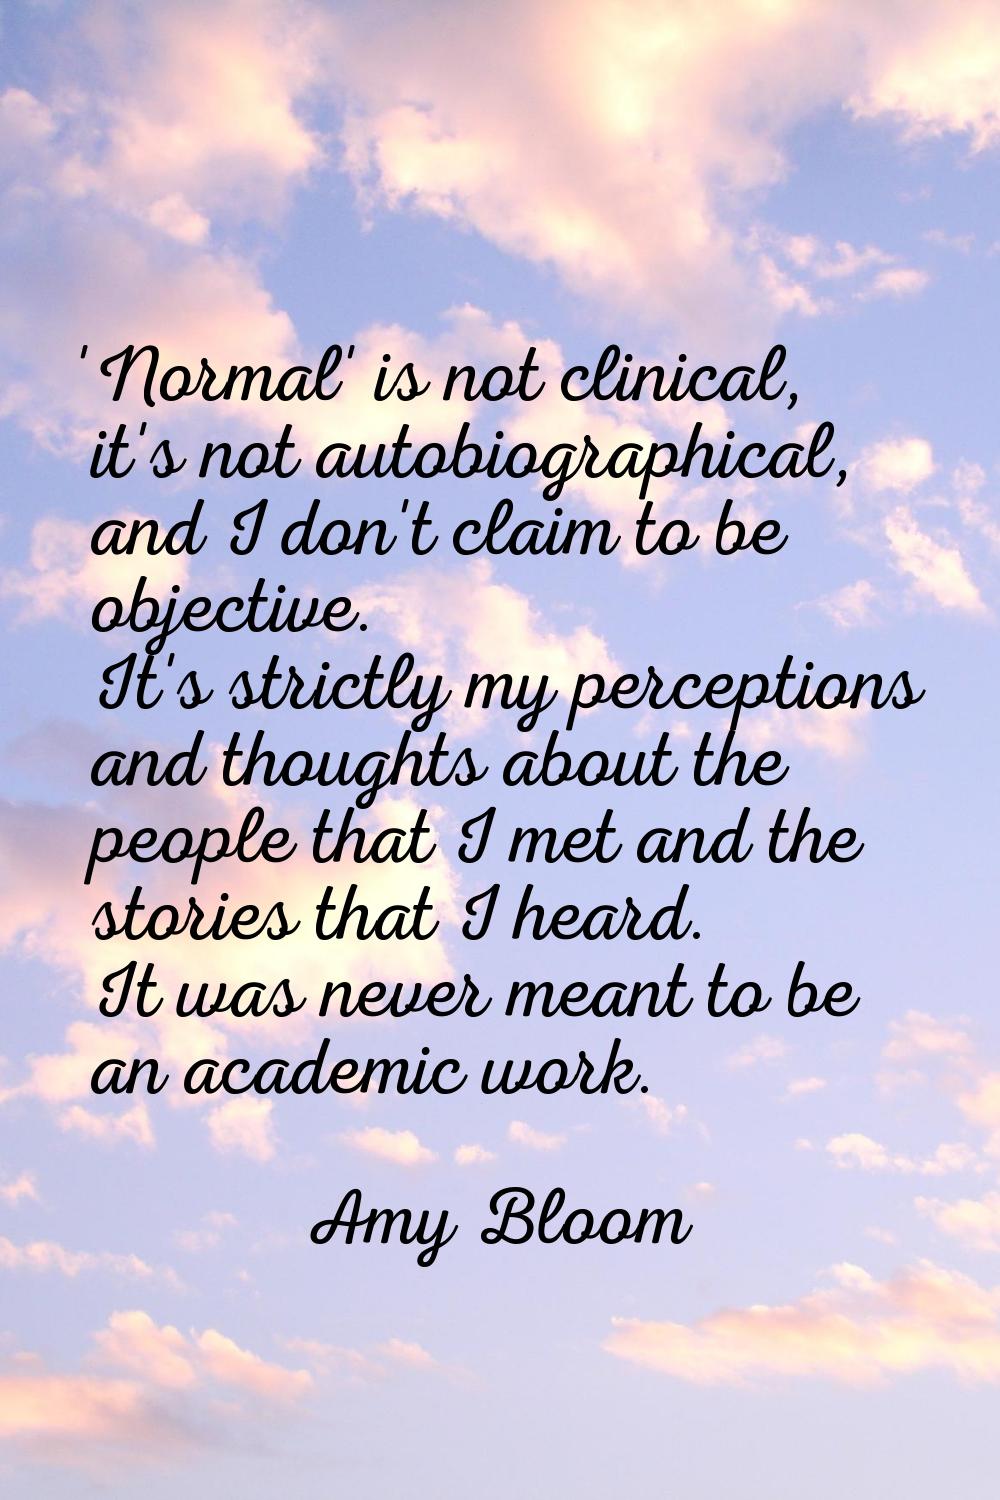 'Normal' is not clinical, it's not autobiographical, and I don't claim to be objective. It's strict